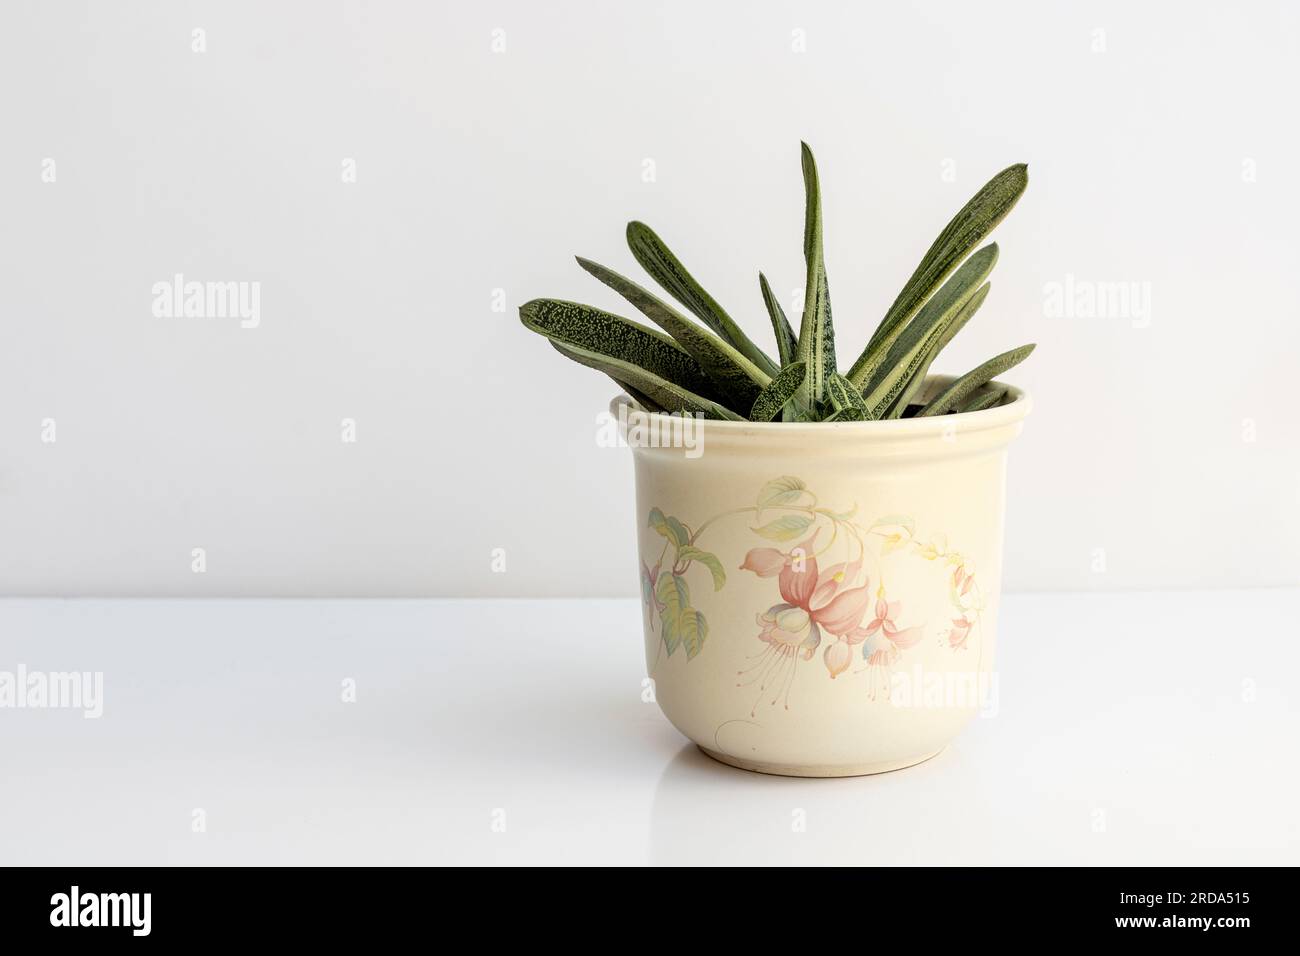 Gasteria little warty succulent plant in a pot isolated on white background Stock Photo